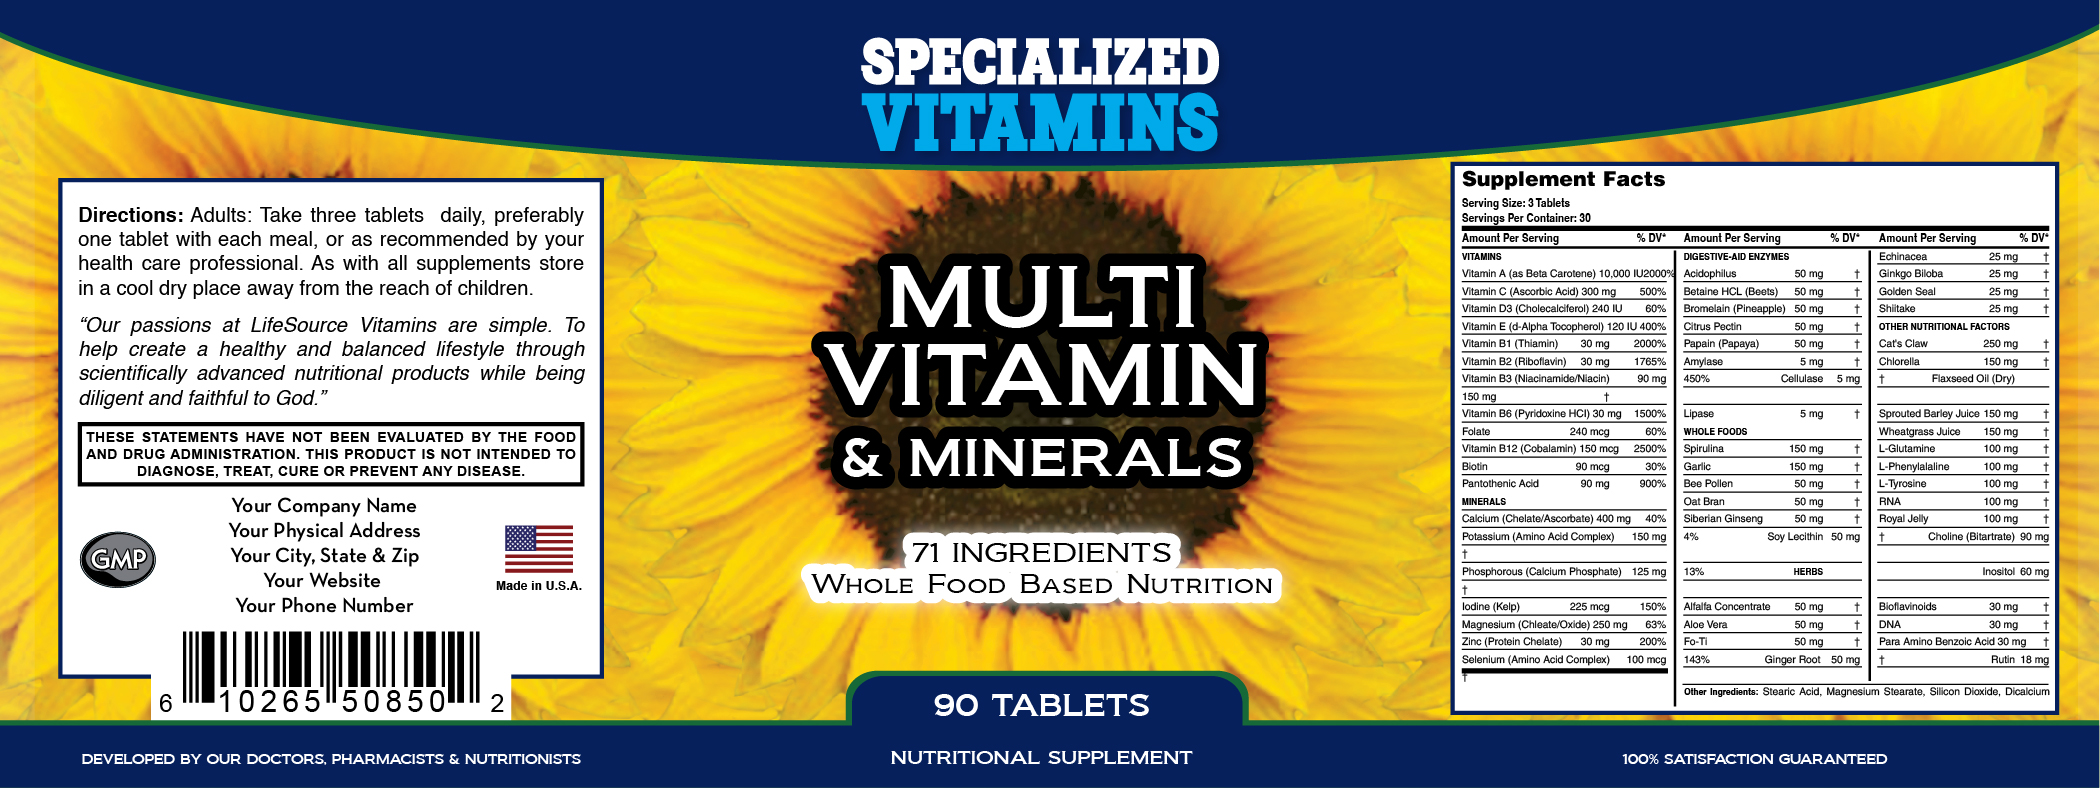 Multivitamins & Minerals - Whole Food Live Ingredients - 90 Tablets - Proprietary Formula